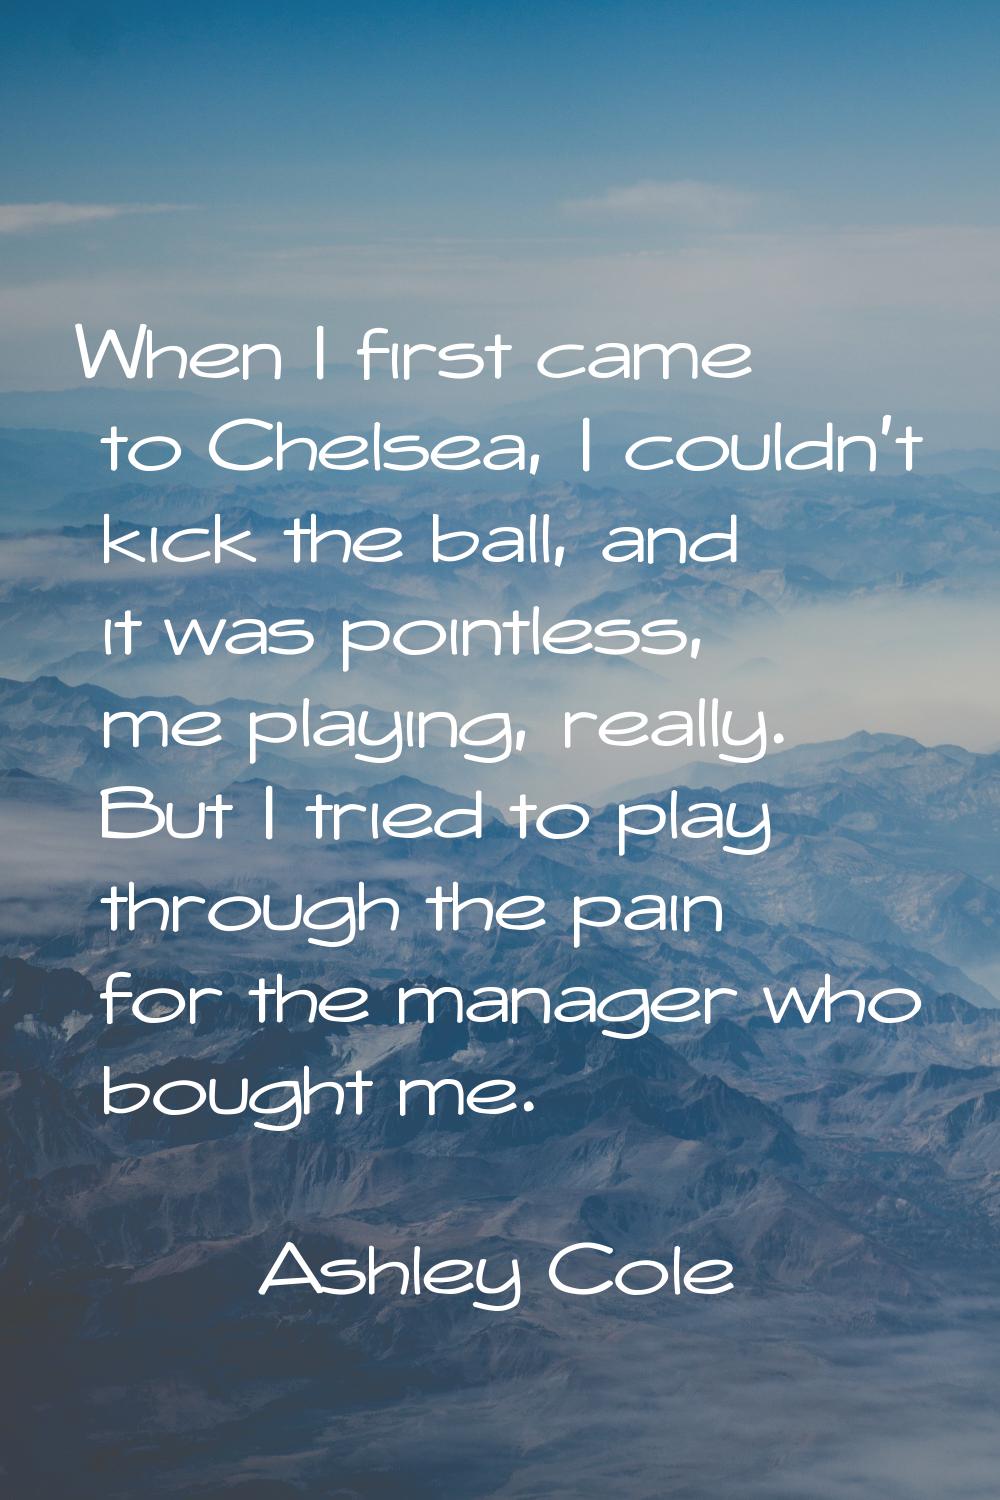 When I first came to Chelsea, I couldn't kick the ball, and it was pointless, me playing, really. B